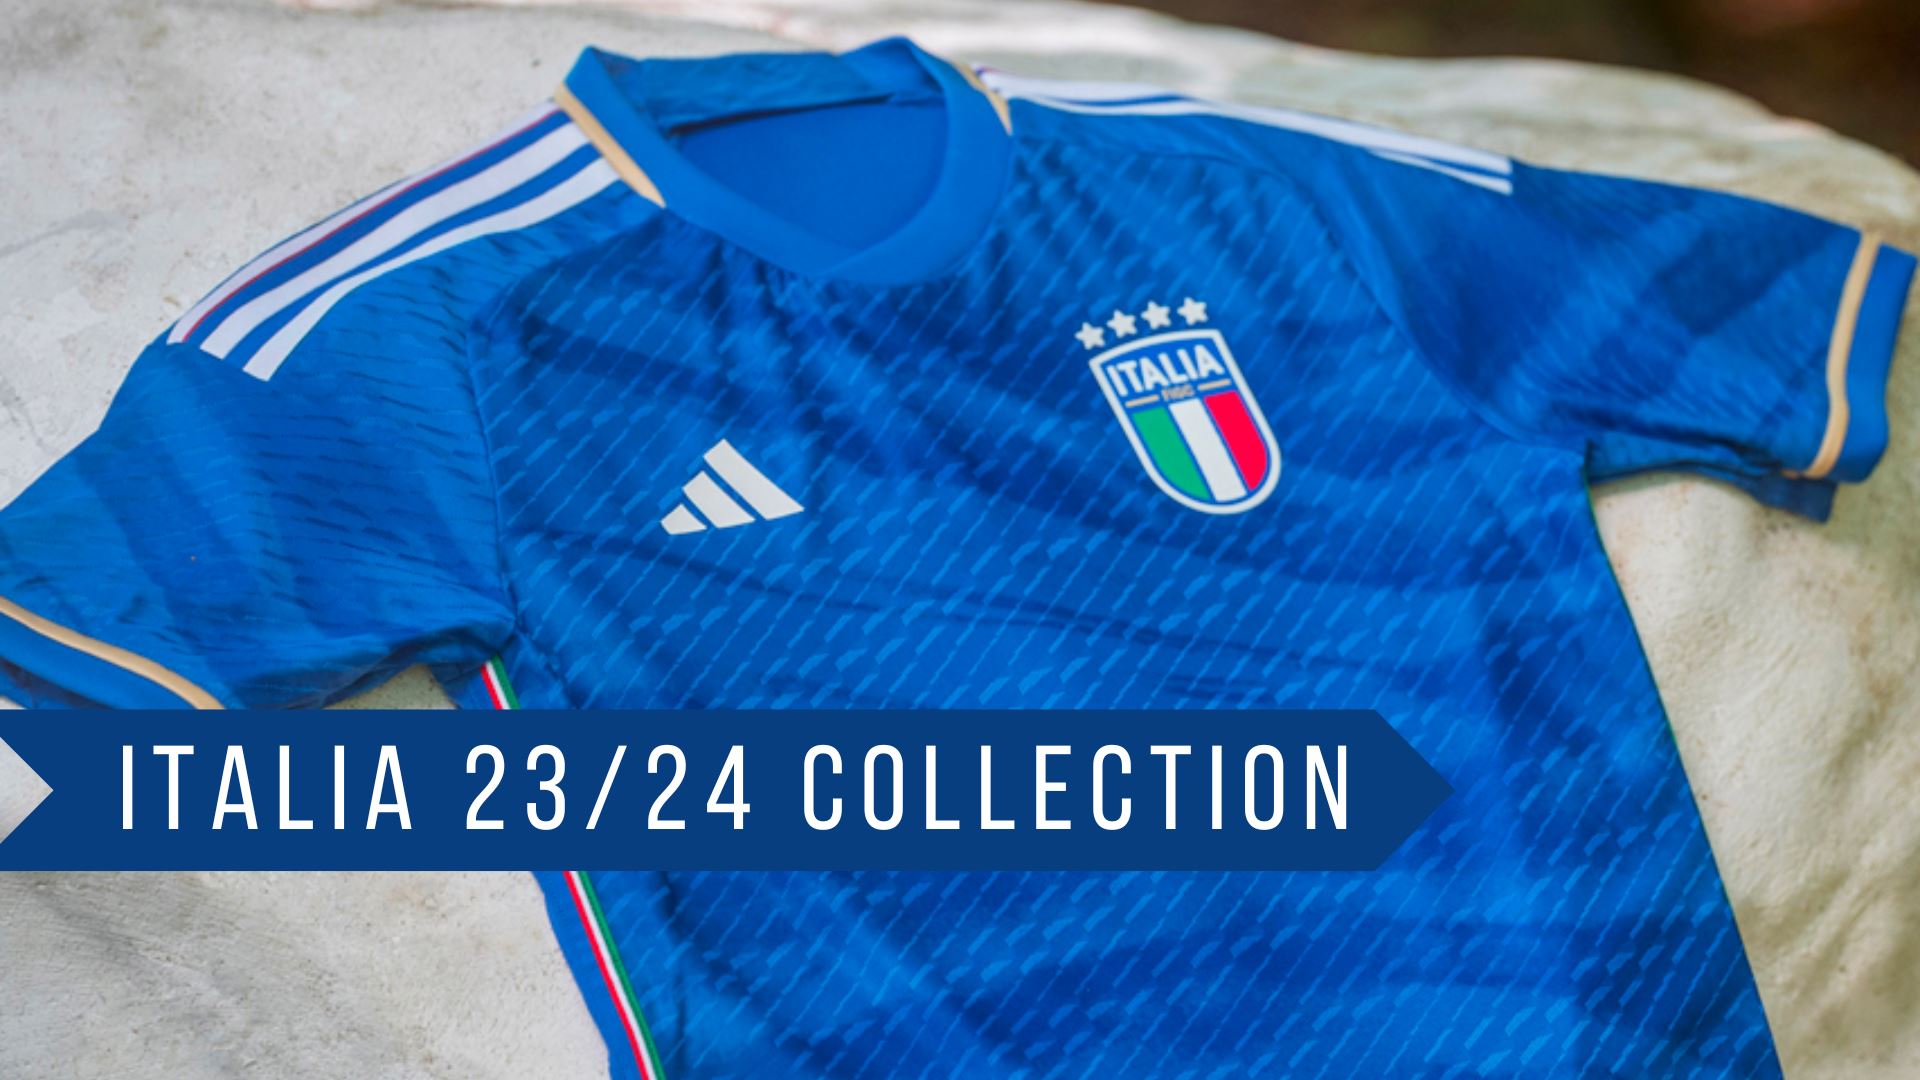 Italy 2023/24 Collection